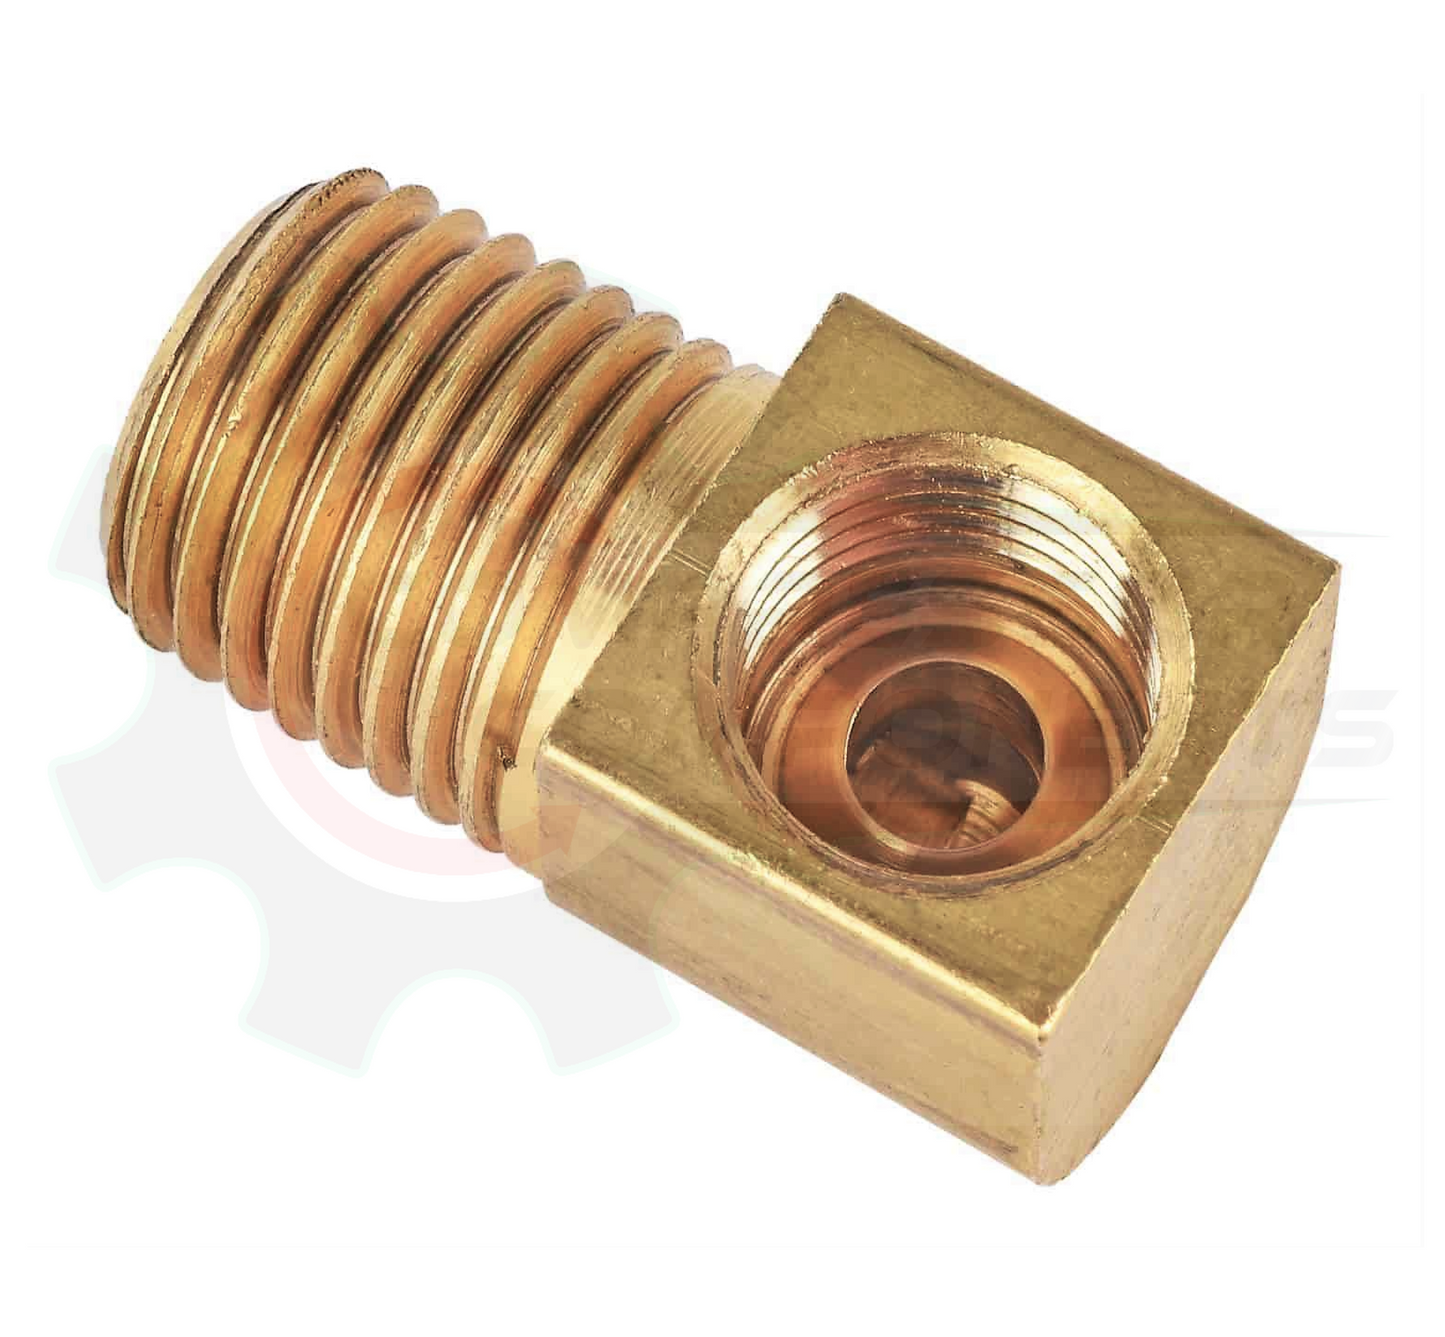 BRASS 3/8" INVERTED FLARE 90 DEGREE ELBOW X 1/8" MNPT ADAPTER